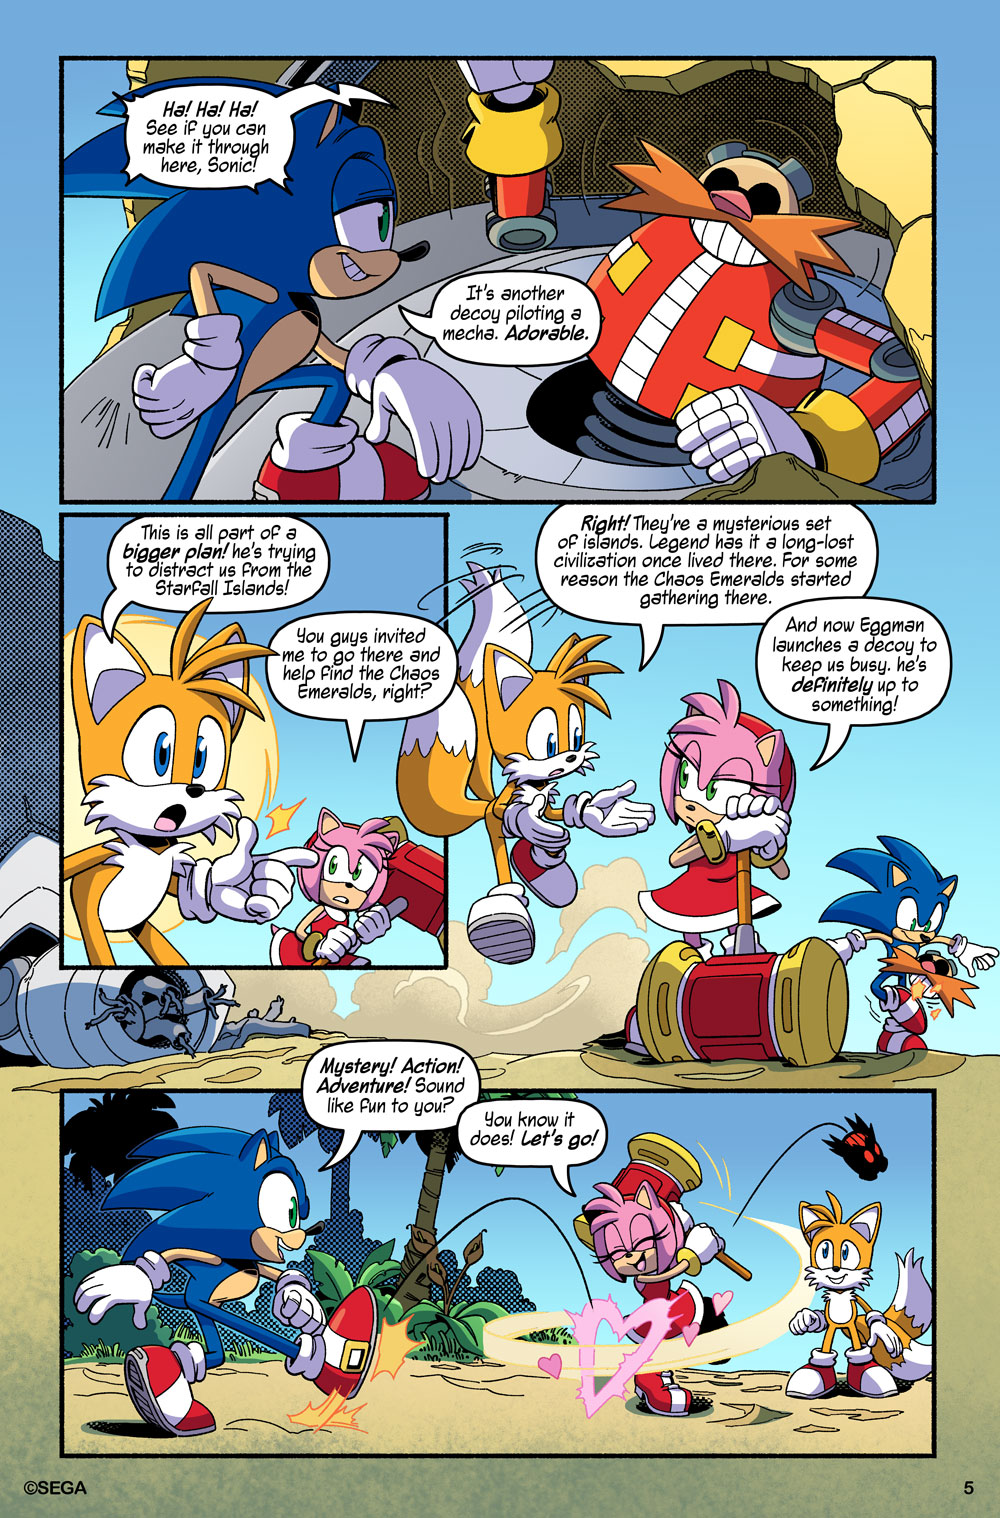 But you're still standing here — SEGA and its most recent Sonamy